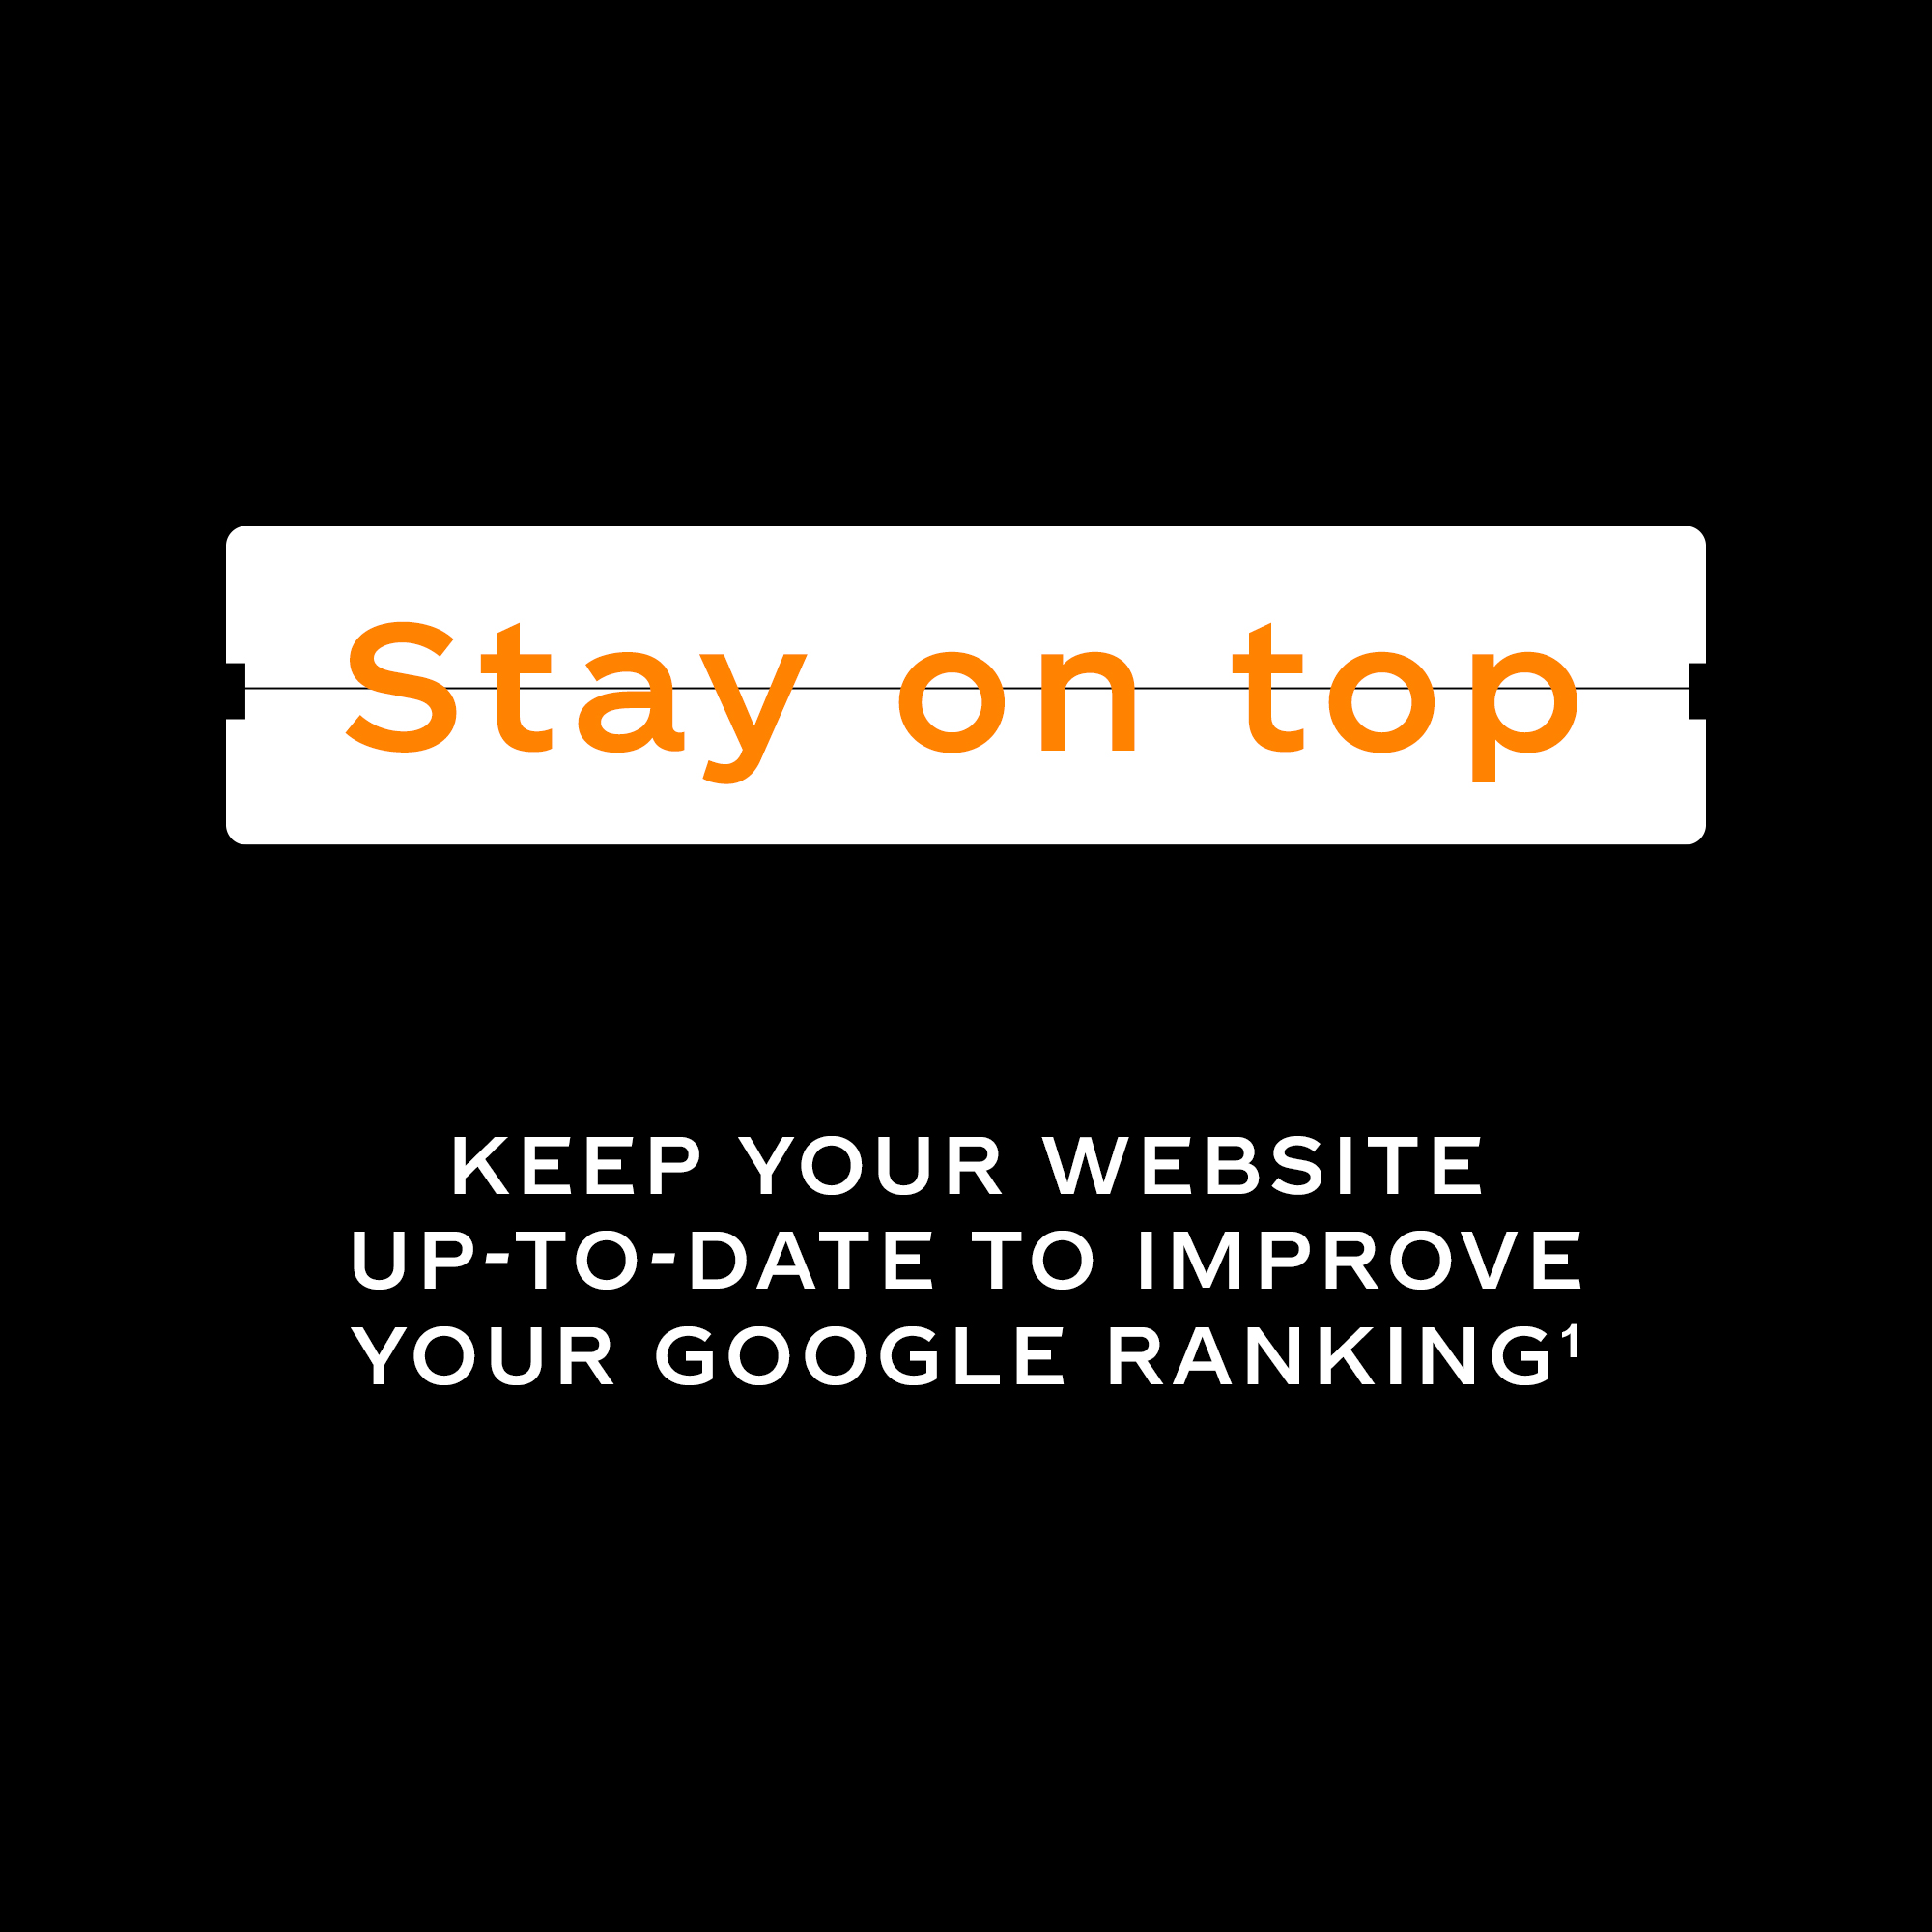 Button-like element features 'Stay on top' text, and white text says 'Keep your website up-to-date to improve your google rakning'